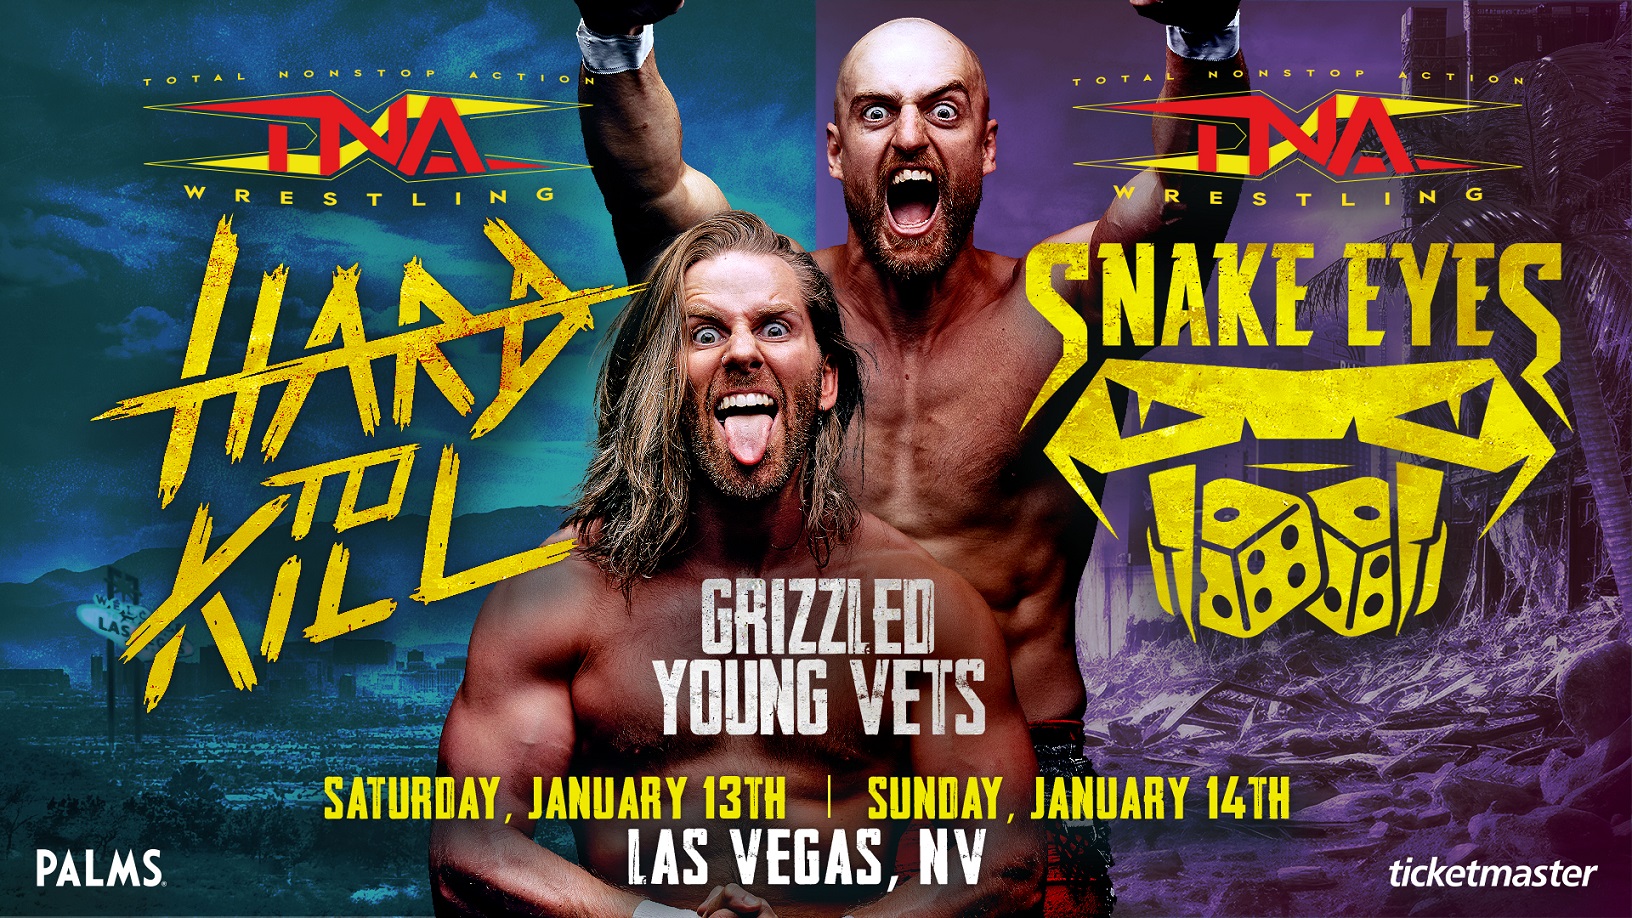 Grizzled Young Vets Are Coming to TNA Hard To Kill & Snake Eyes – TNA Wrestling